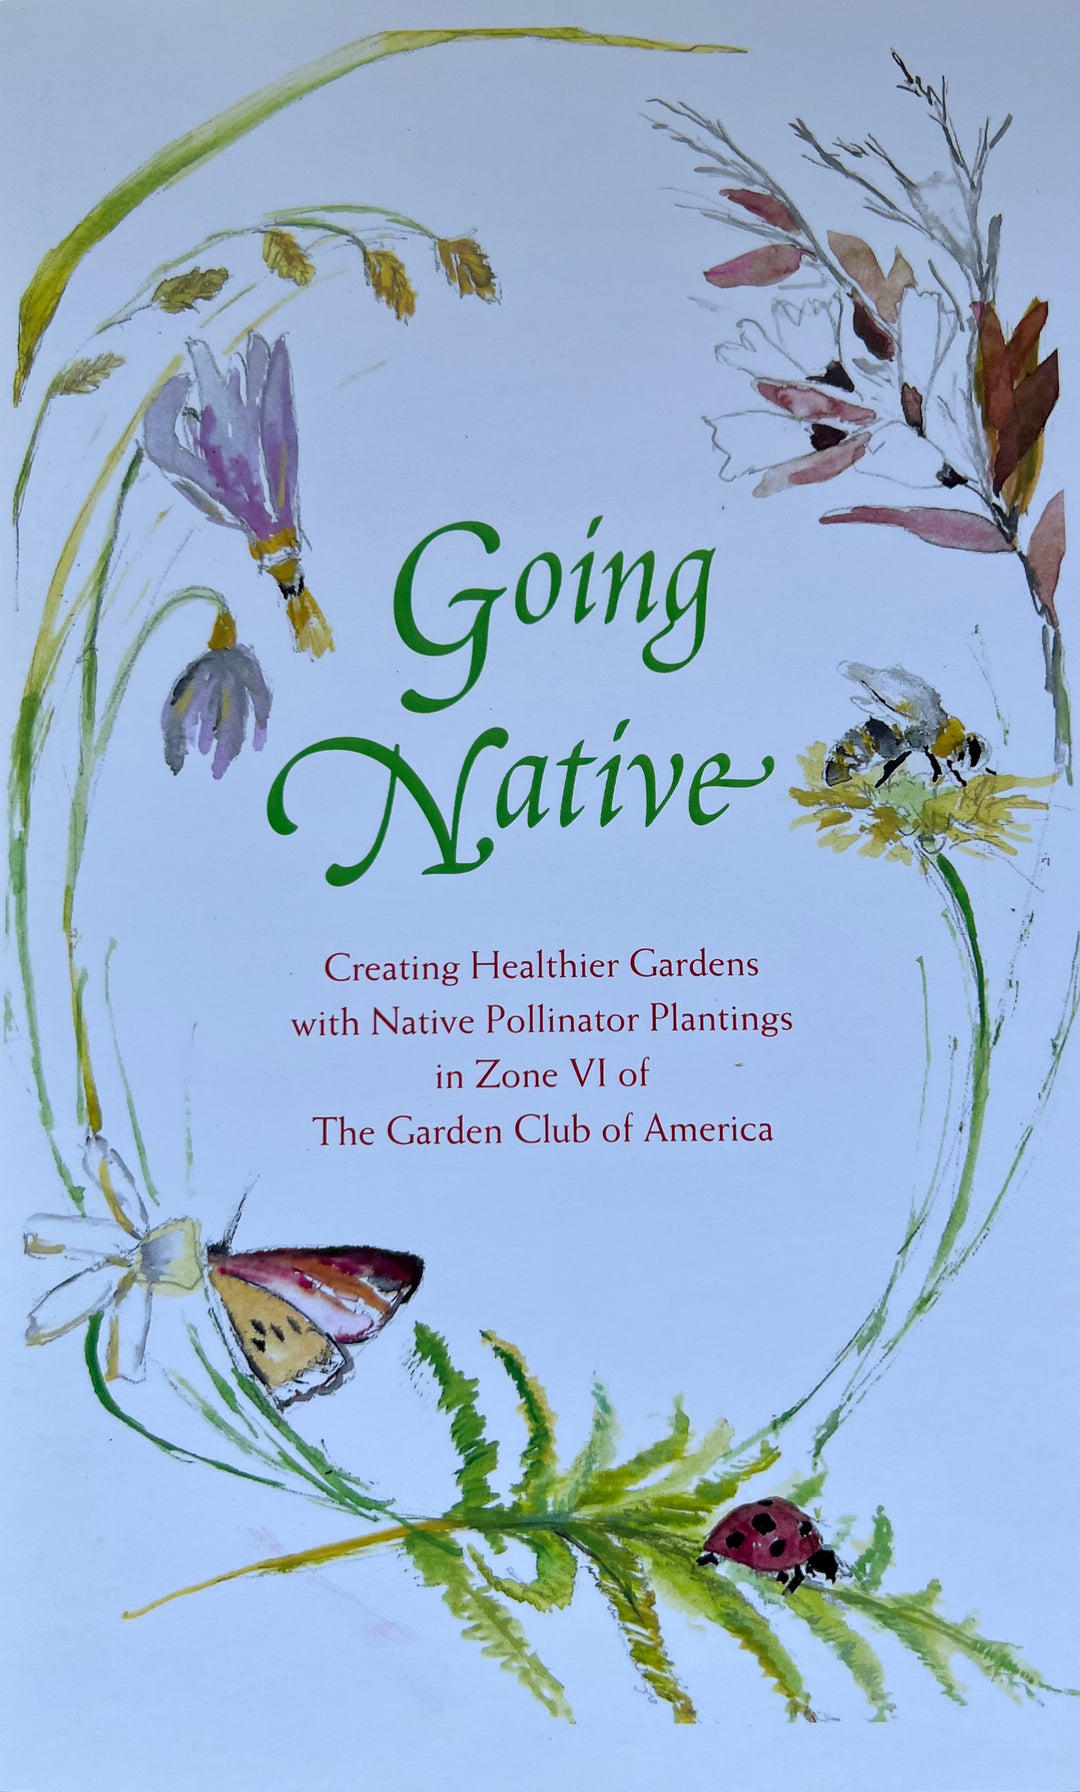 Going Native - Casey & Company